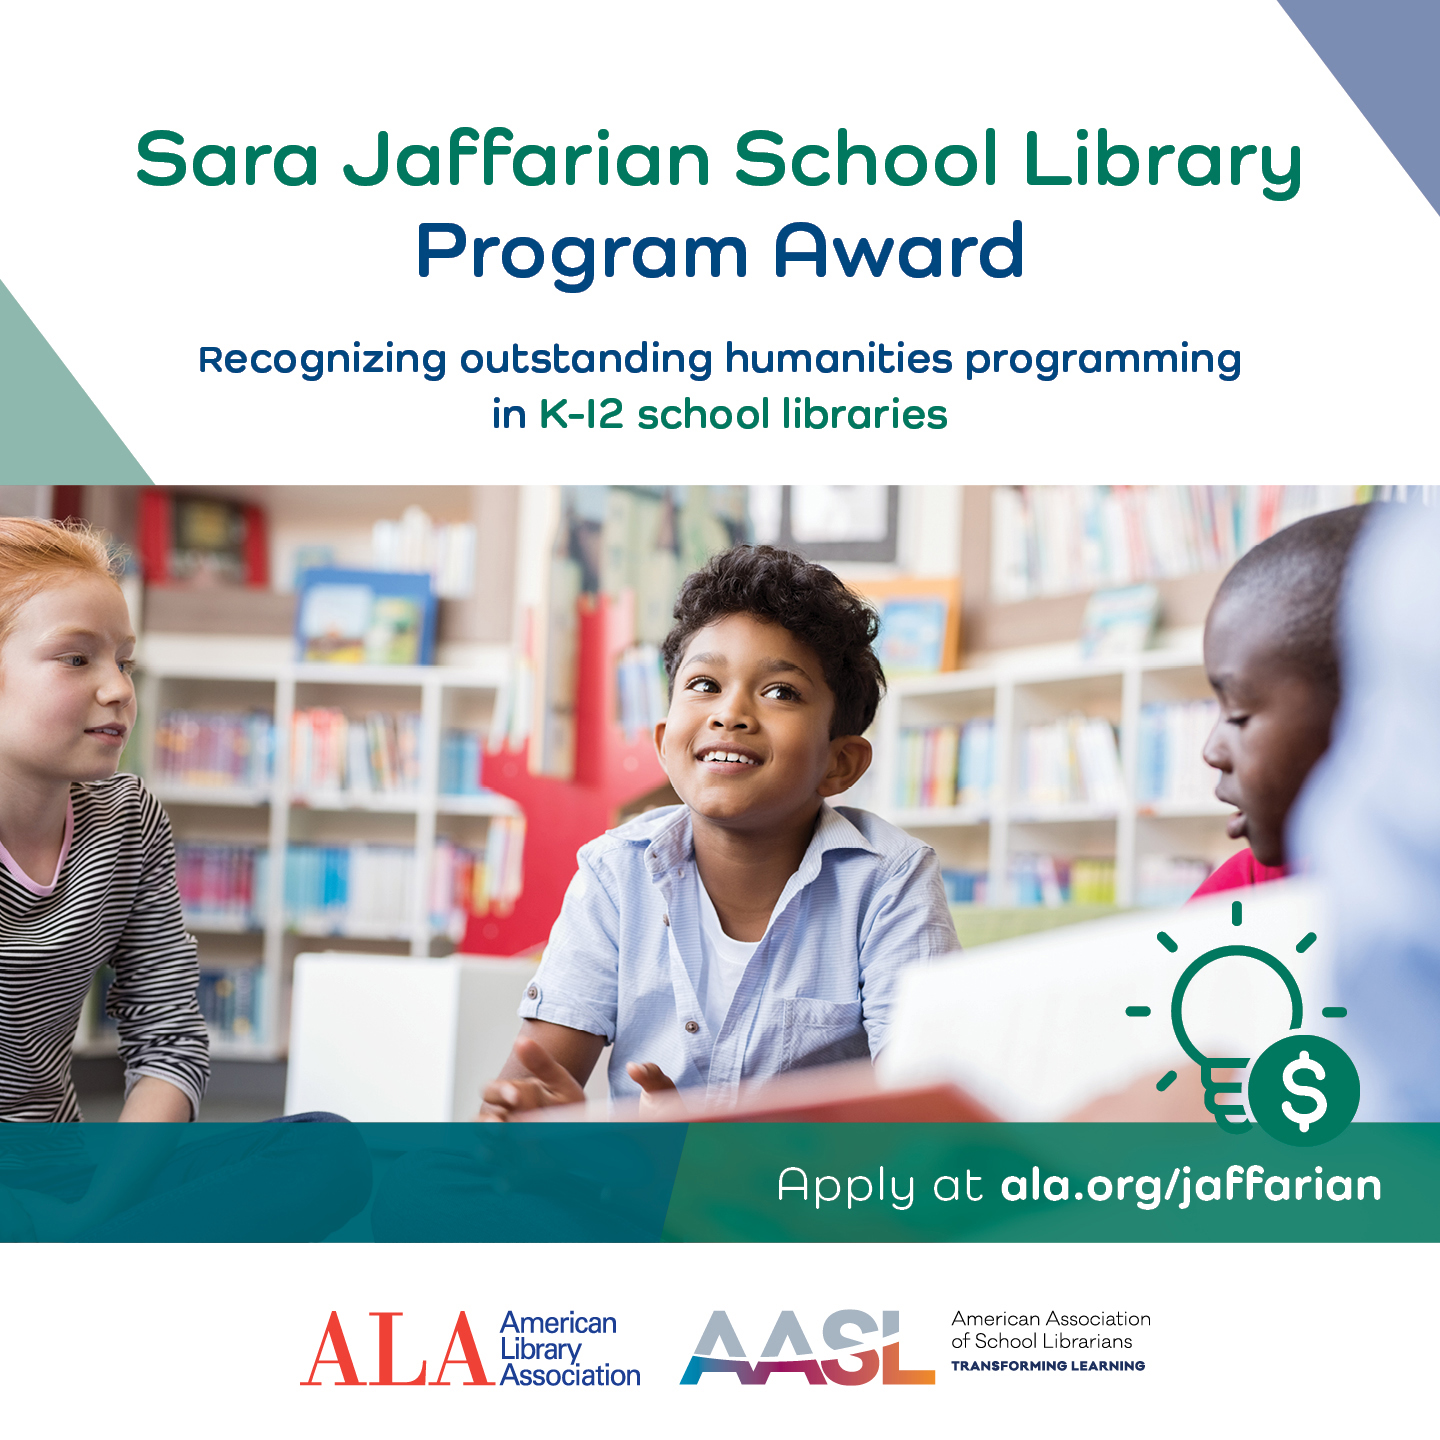 Photograph of three children sitting together. Text reads: Sara Jaffarian School Library Program Award. Recognizing outstanding humanities programming in K-12 school libraries. Apply at ala.org/jaffarian 